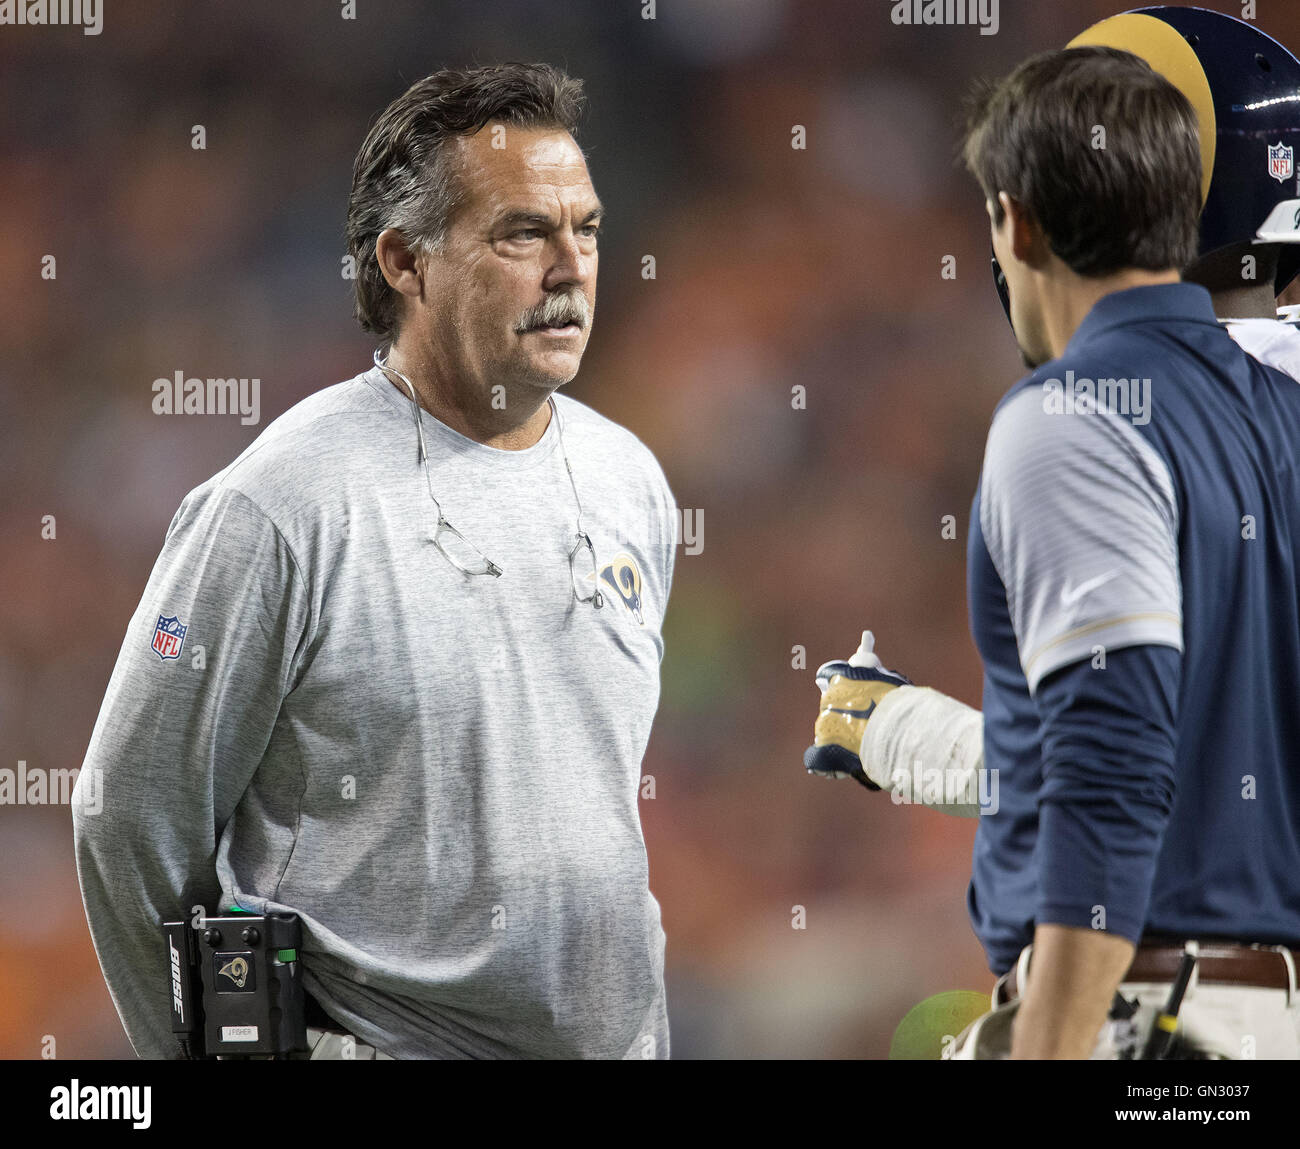 Denver, Colorado, USA. 27th Aug, 2016. Rams Head Coach JEFF FISHER, left, looks on at an injured player during the 2nd. Half at Sports Authority Field at Mile High Saturday night. The Broncos beat the Rams 17-9. © Hector Acevedo/ZUMA Wire/Alamy Live News Stock Photo